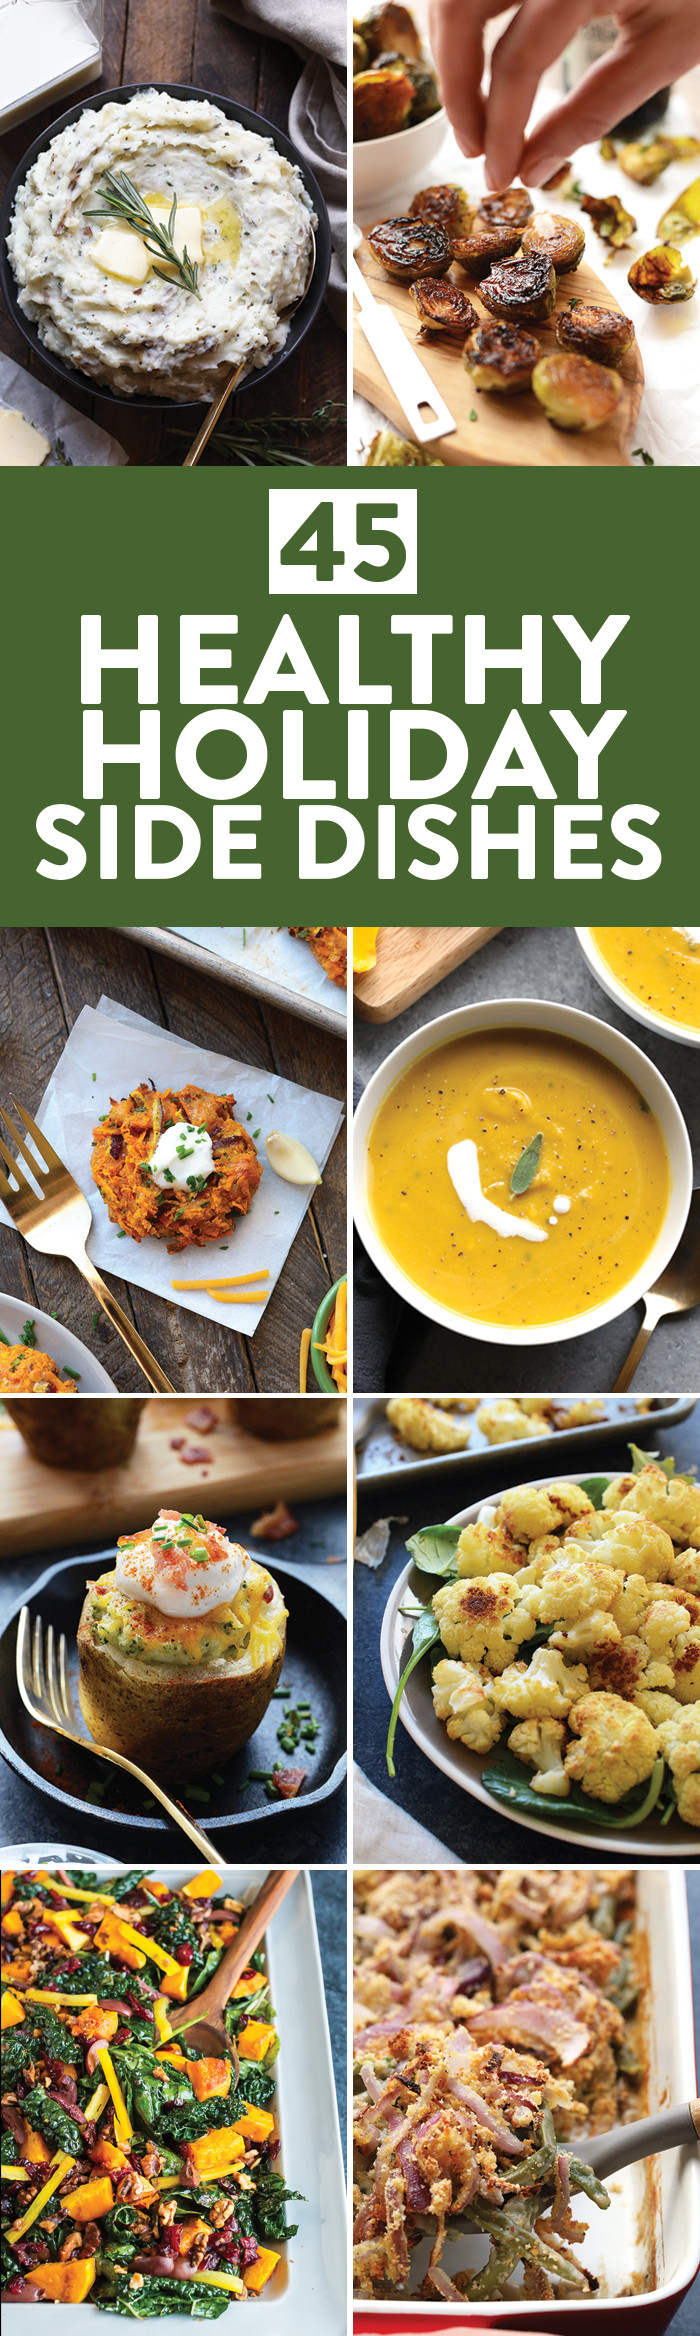 Healthy Holiday Side Dishes
 45 Healthy Holiday Side Dishes for Thanksgiving Christmas